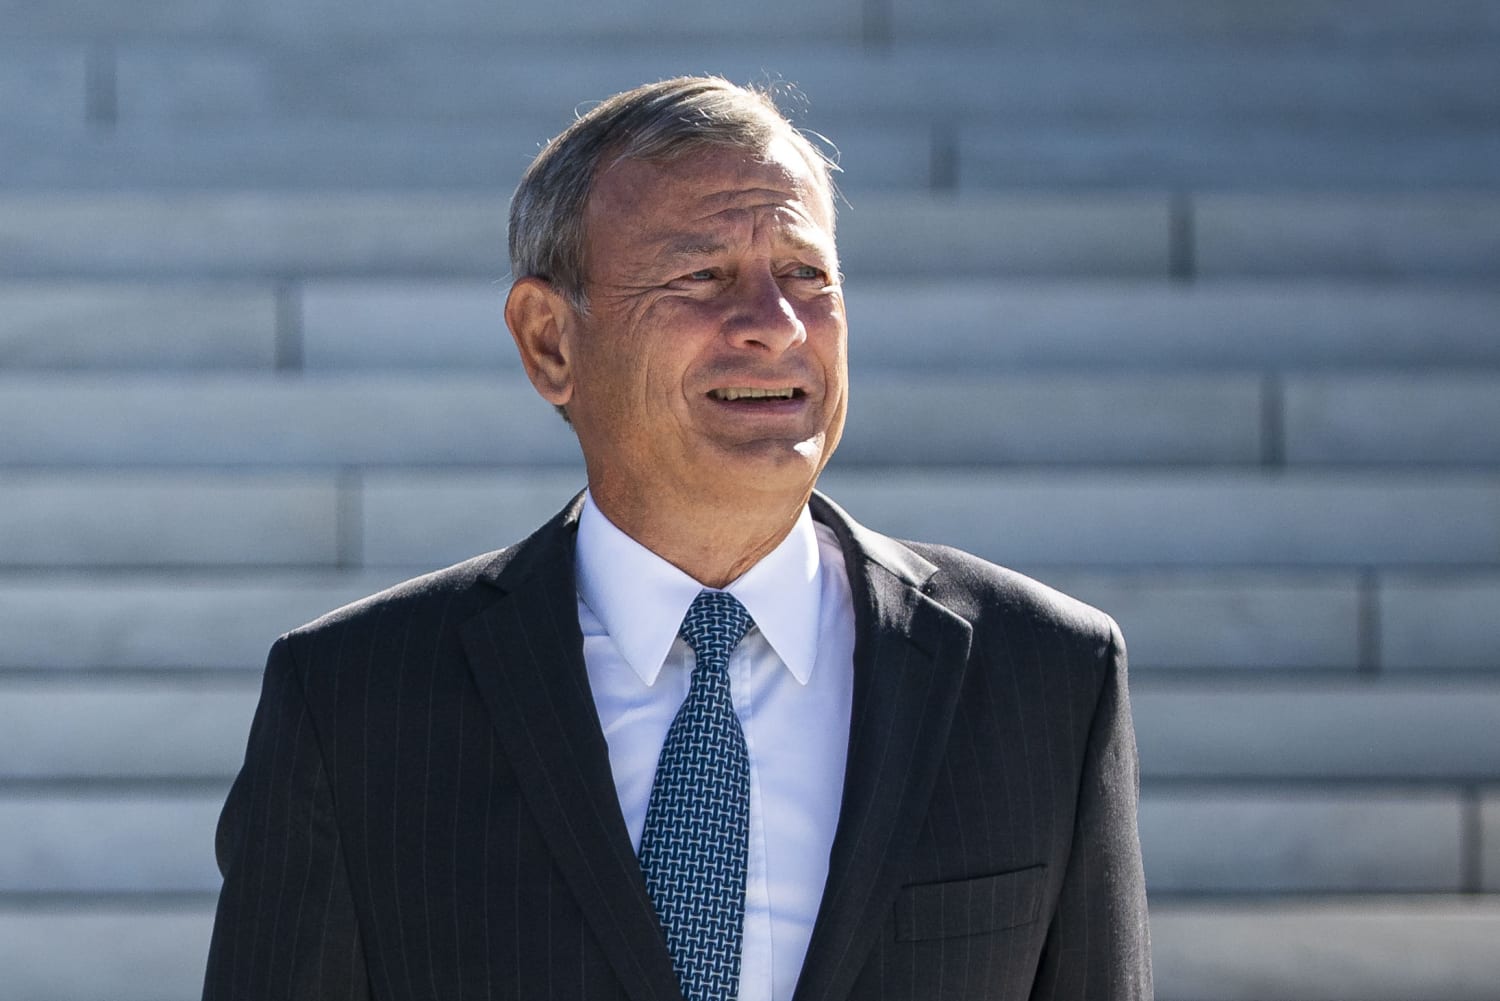 Chief Justice Roberts missed the point of his own history lesson